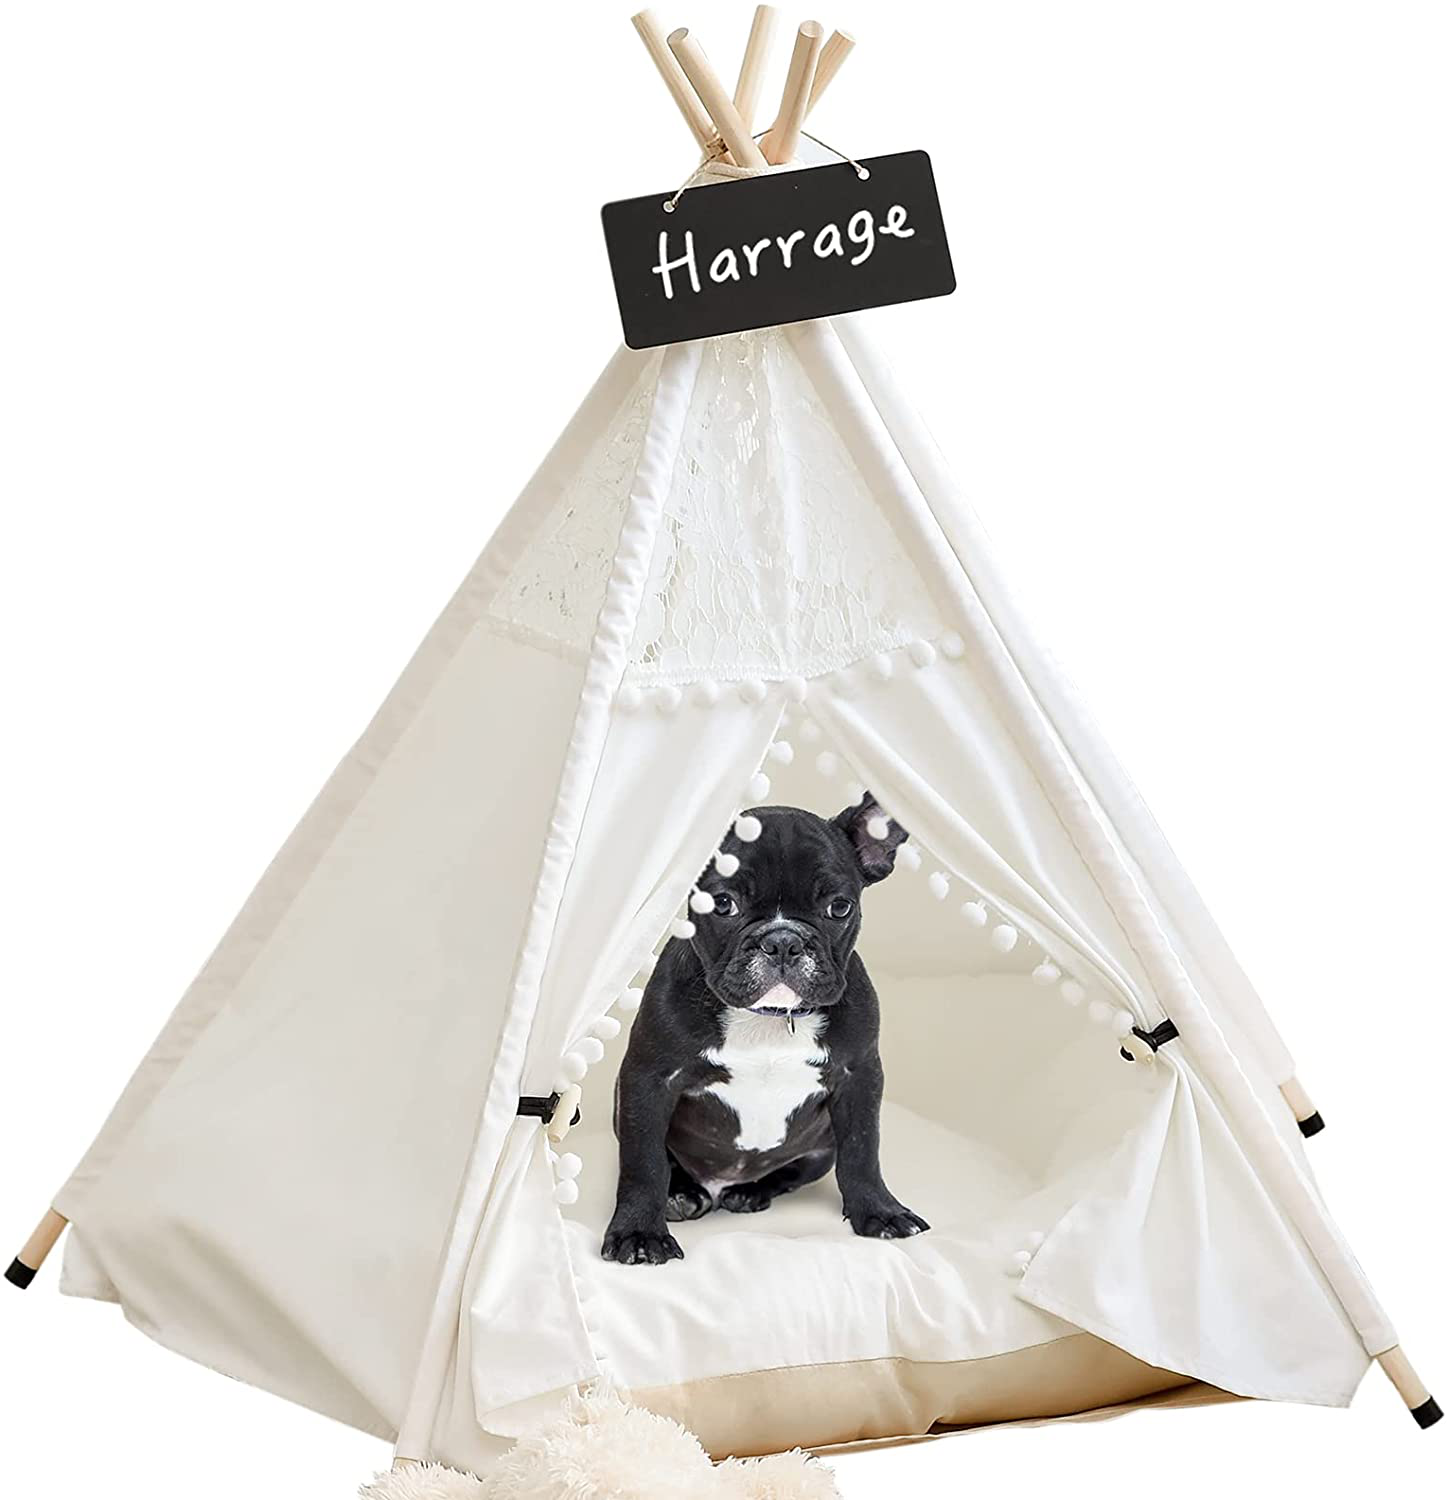 Harrage Folding Indoor Dogs House, Portable Pet Teepee Dog & Cat Tents, 24Inch Small Dog & Cat Cute Puppy House with Cushion Bed Animals & Pet Supplies > Pet Supplies > Dog Supplies > Dog Houses Harrage White Lace  